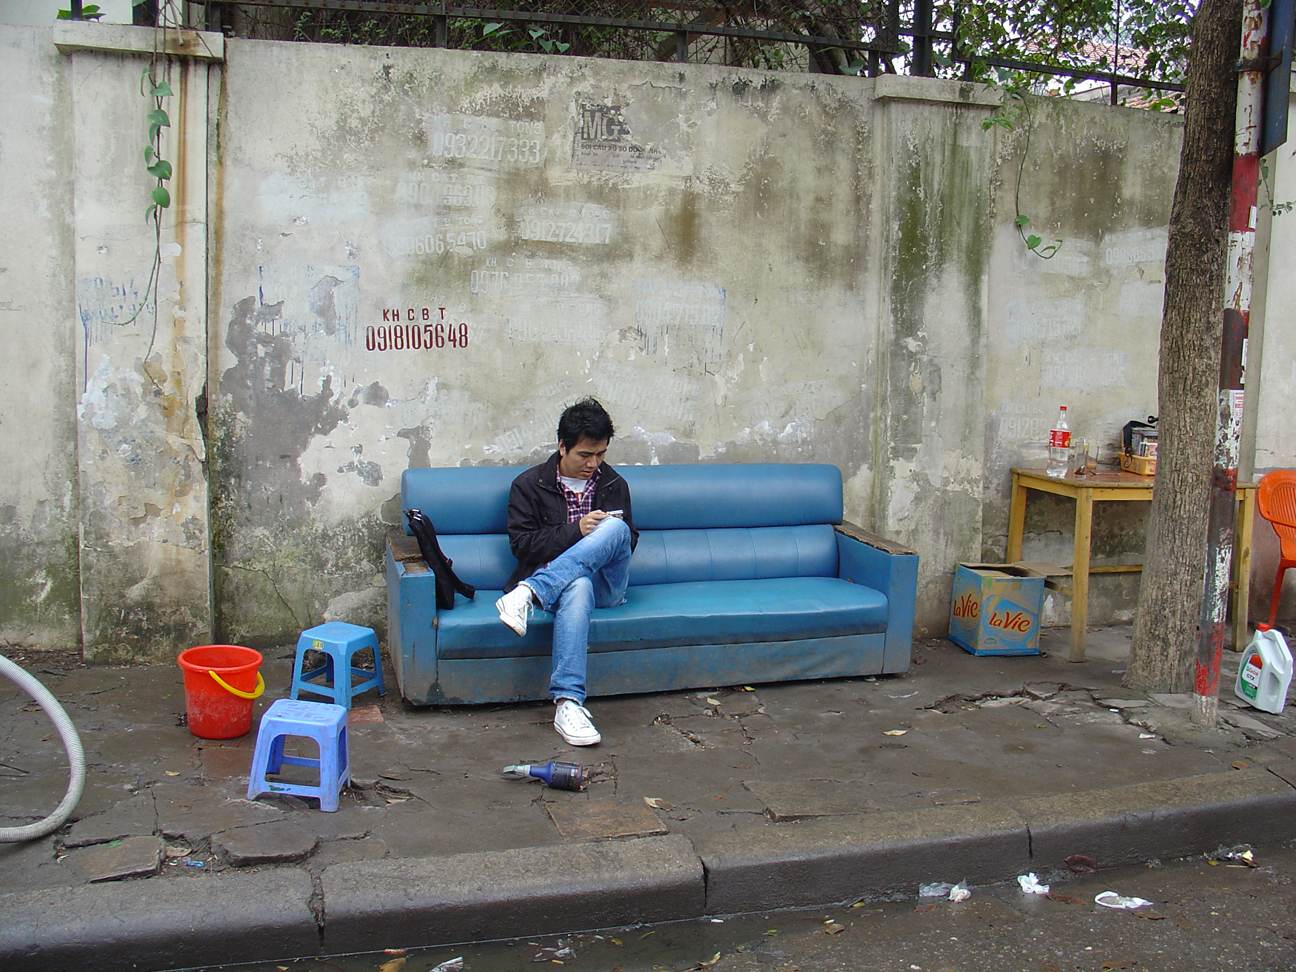 A man sitting on a couch at the street.